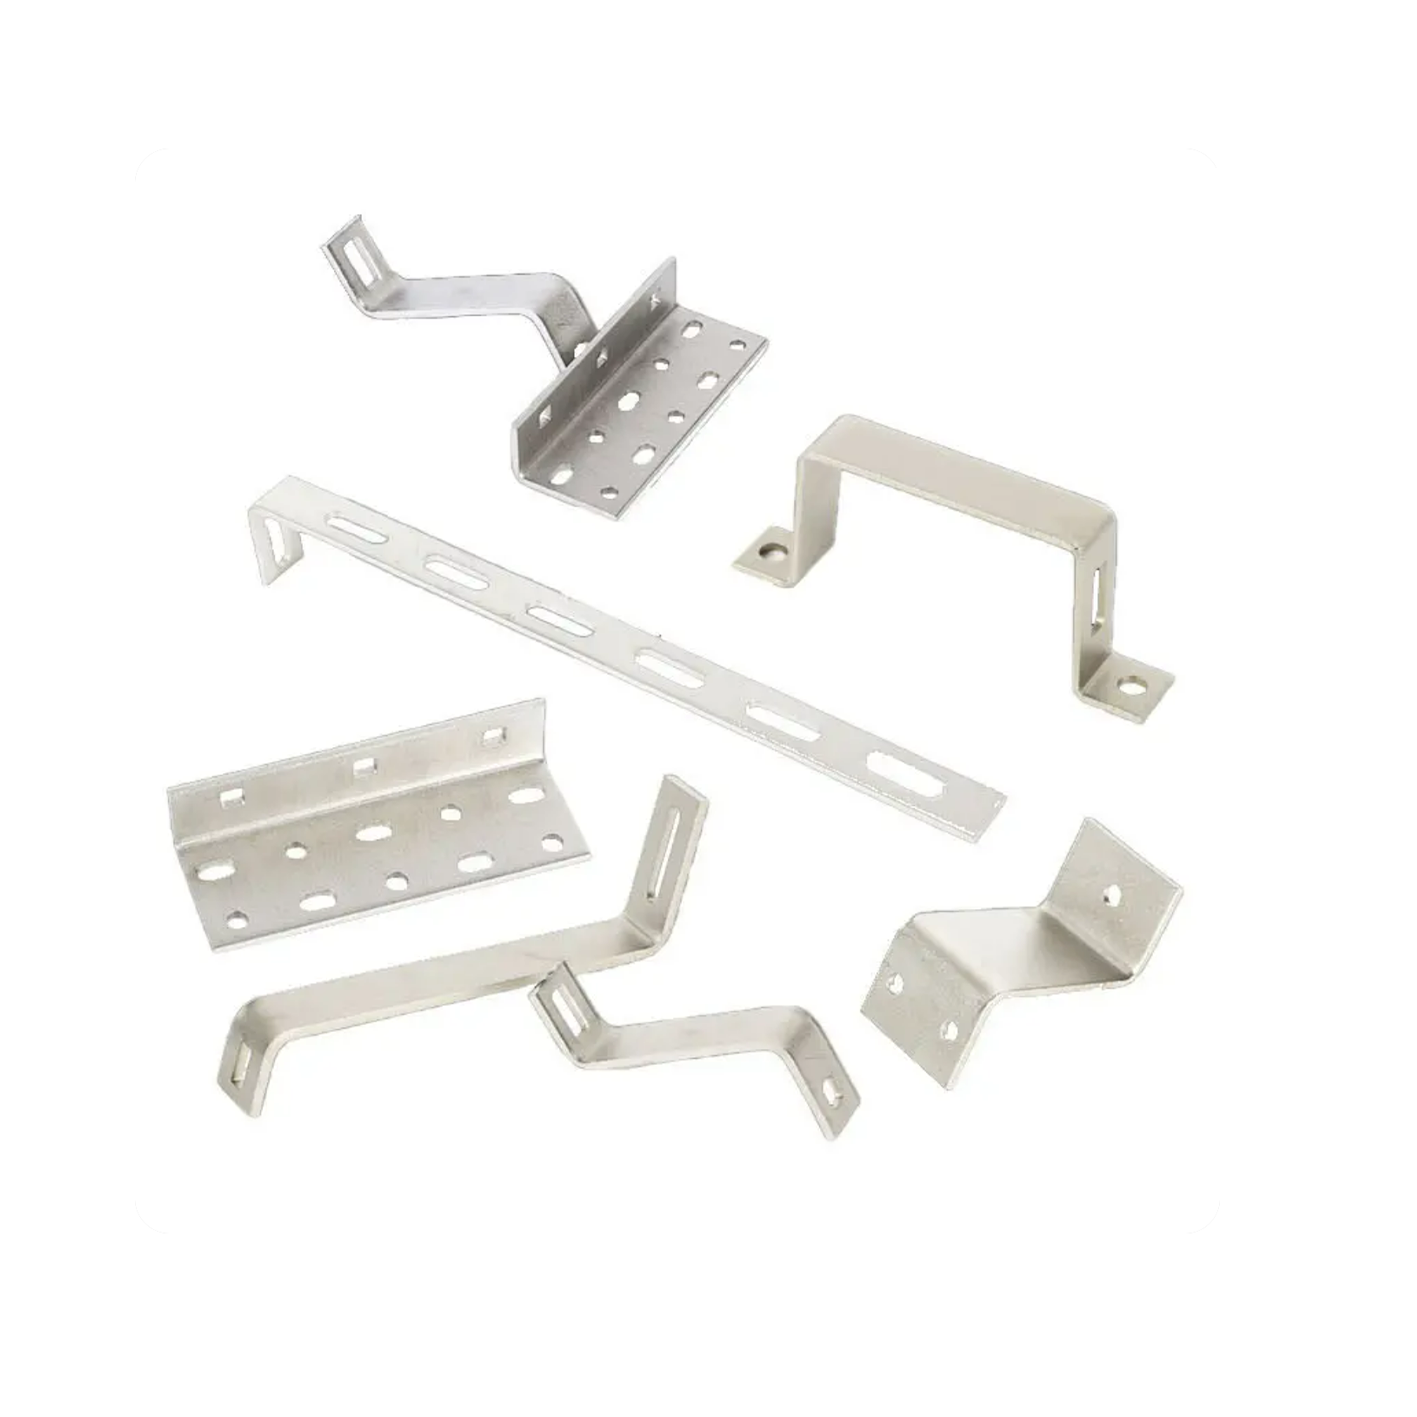 High-precision custom hardware stamping parts